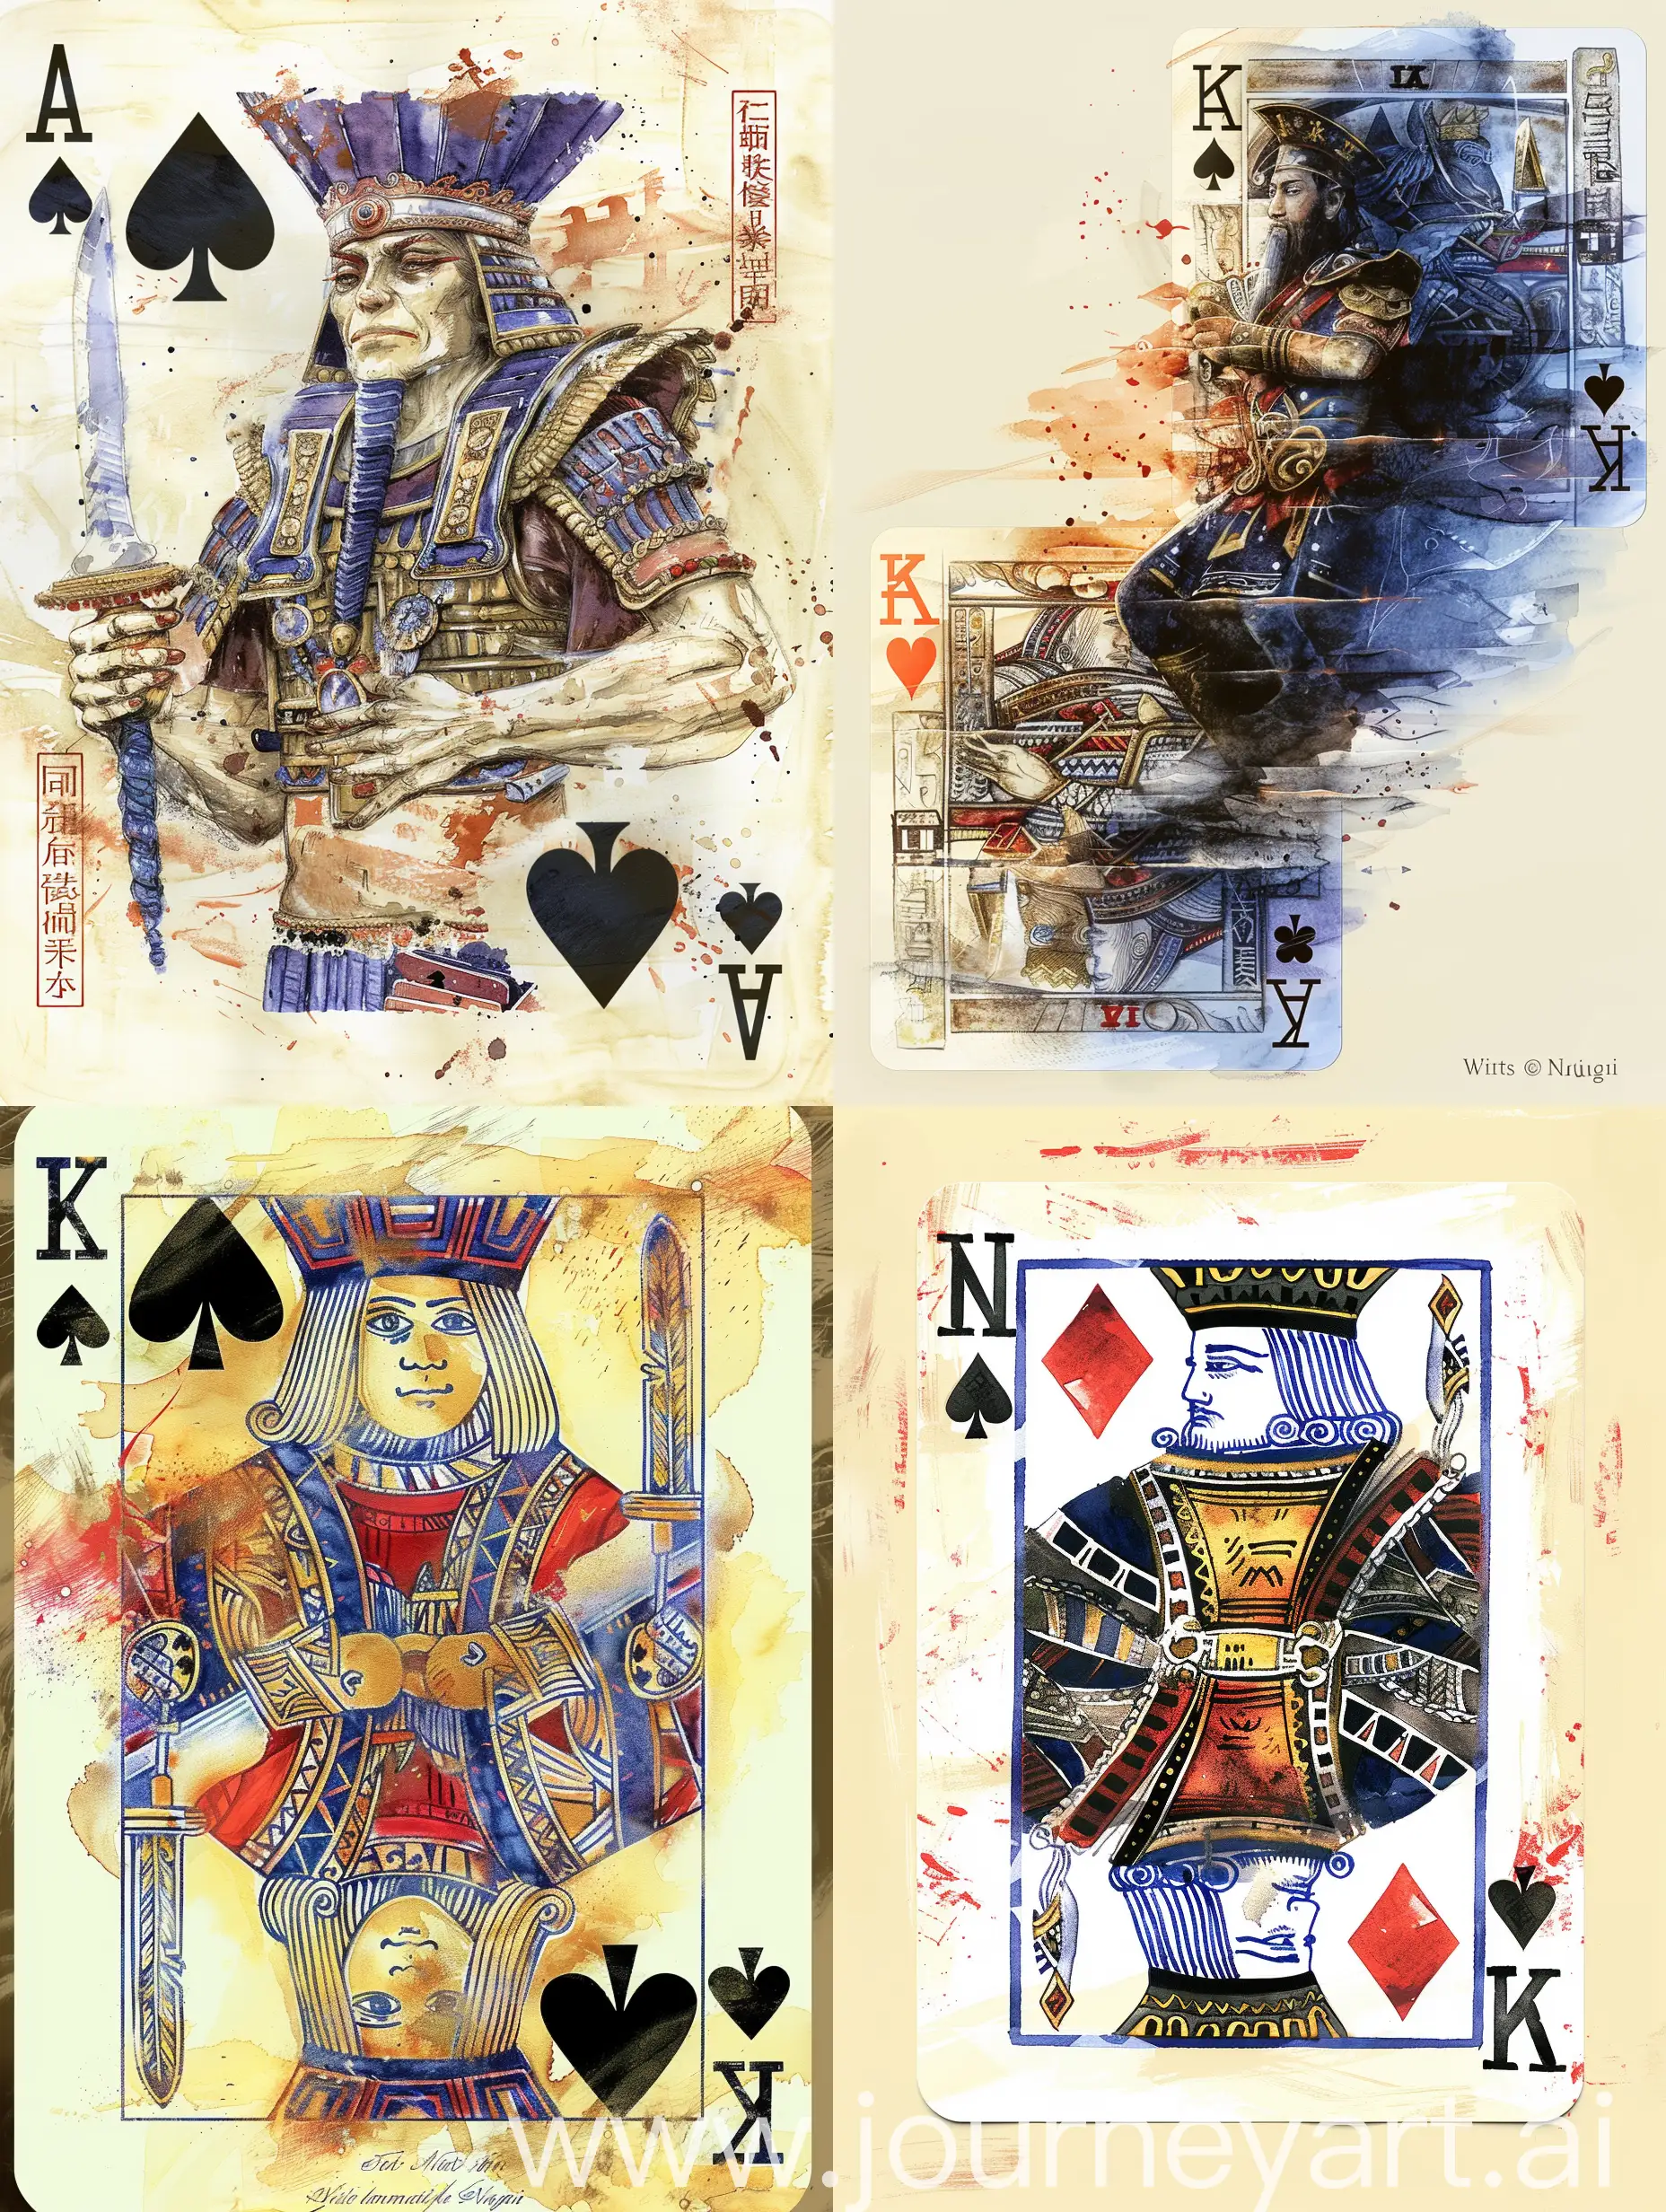 The design of the back of the playing card, the theme of ancient civilizations, watercolor style, Victor Ngai